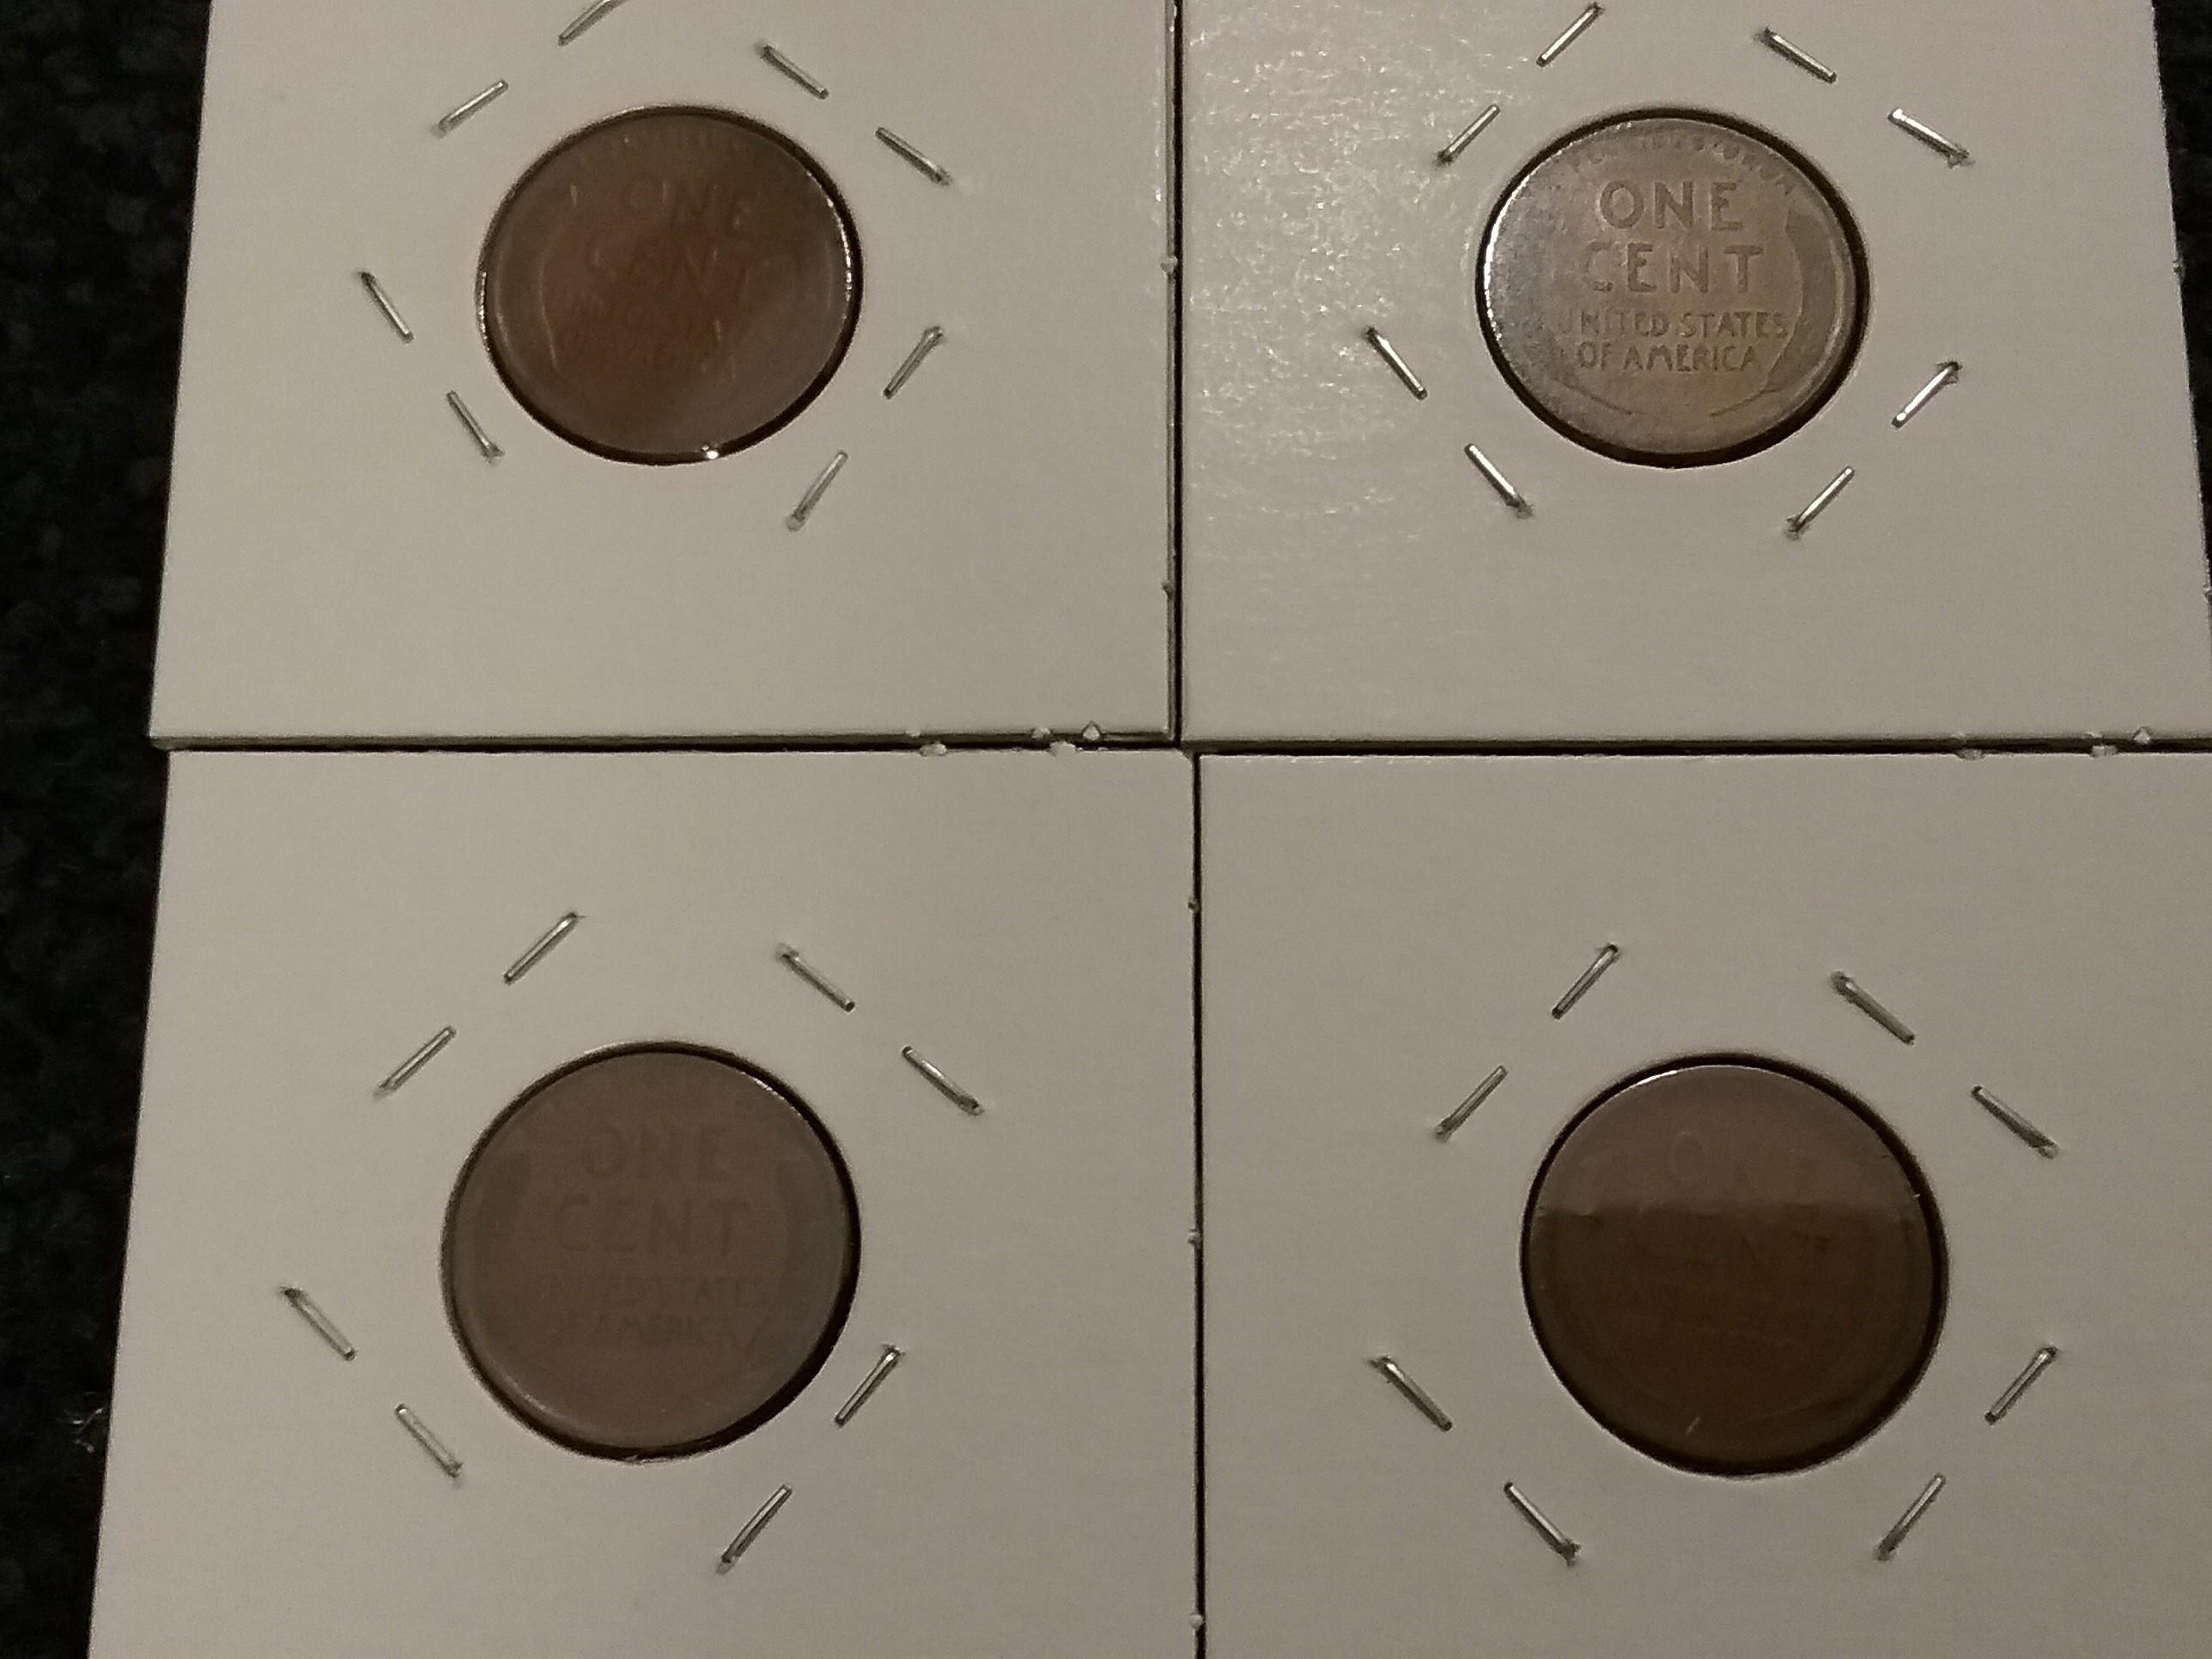 Four early date wheat cents in nice shape